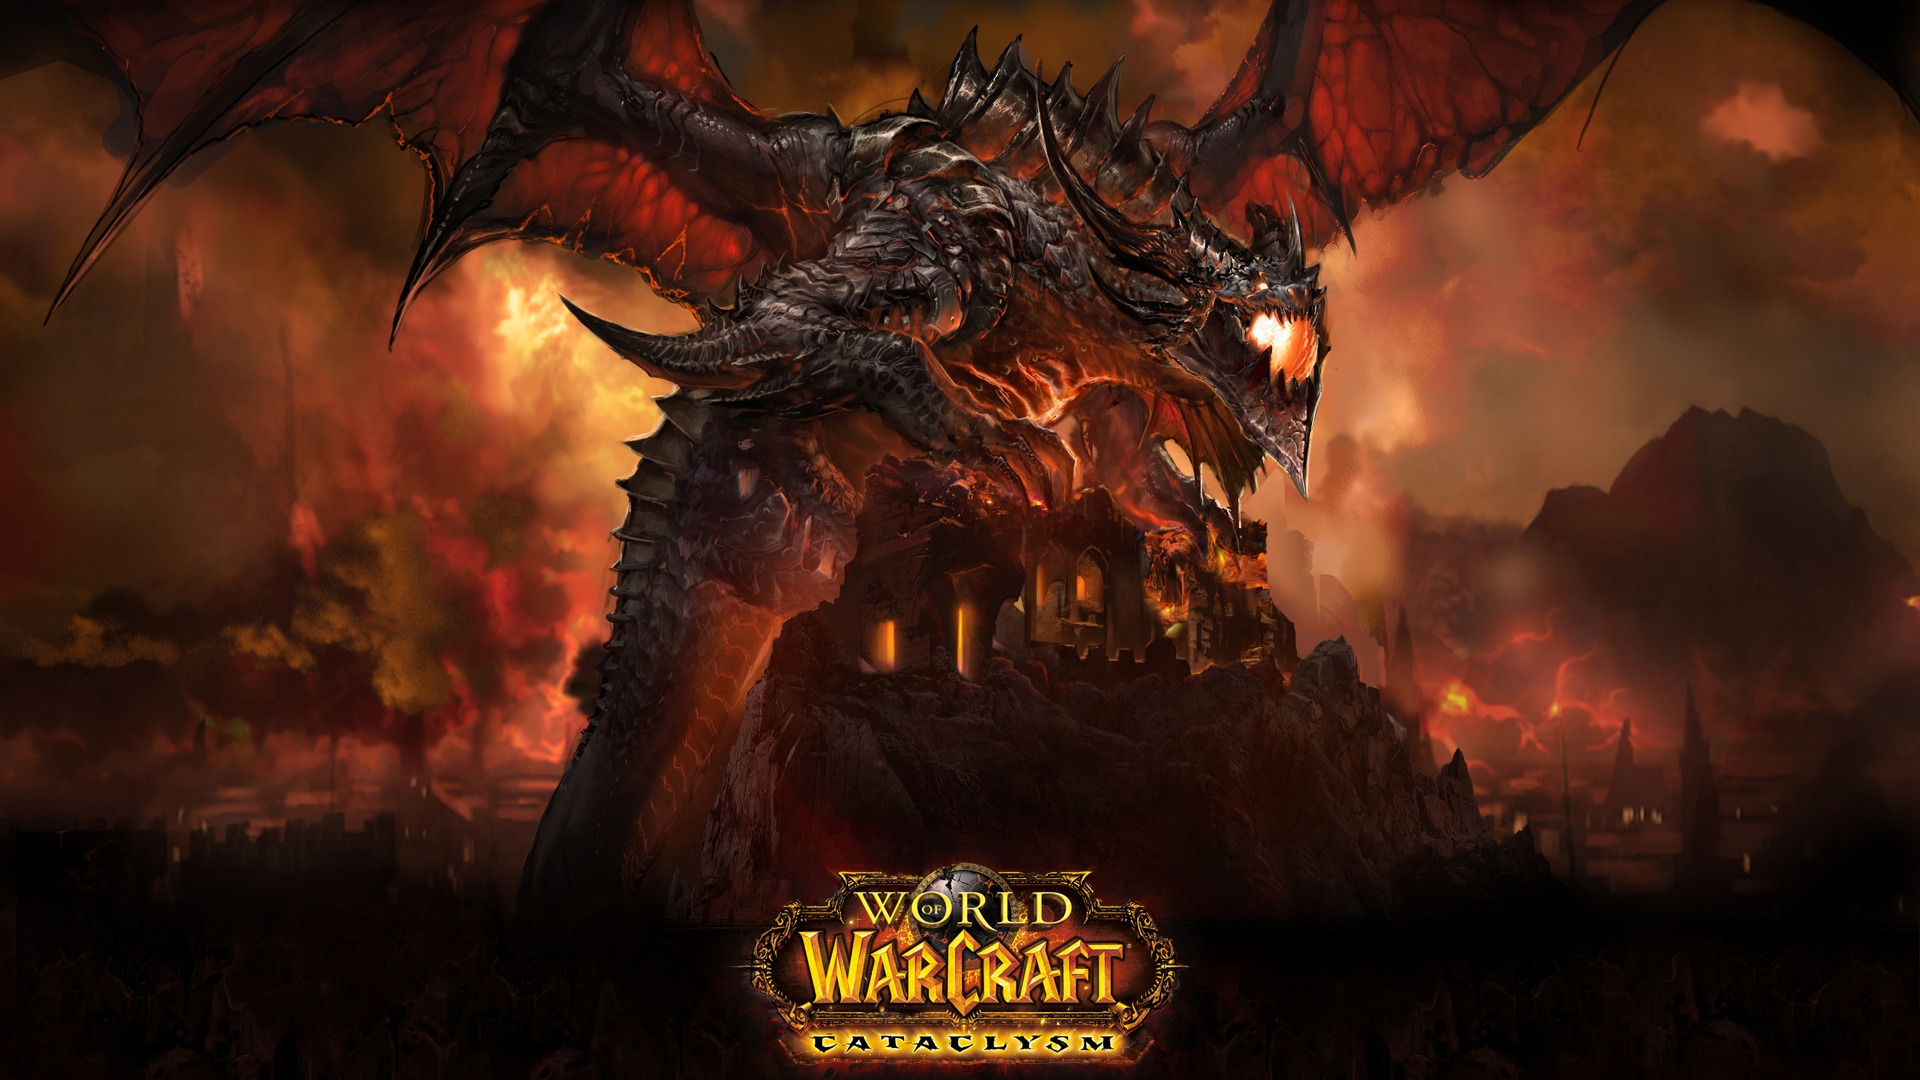 Deathwing WoW Cataclysm for 1920 x 1080 HDTV 1080p resolution